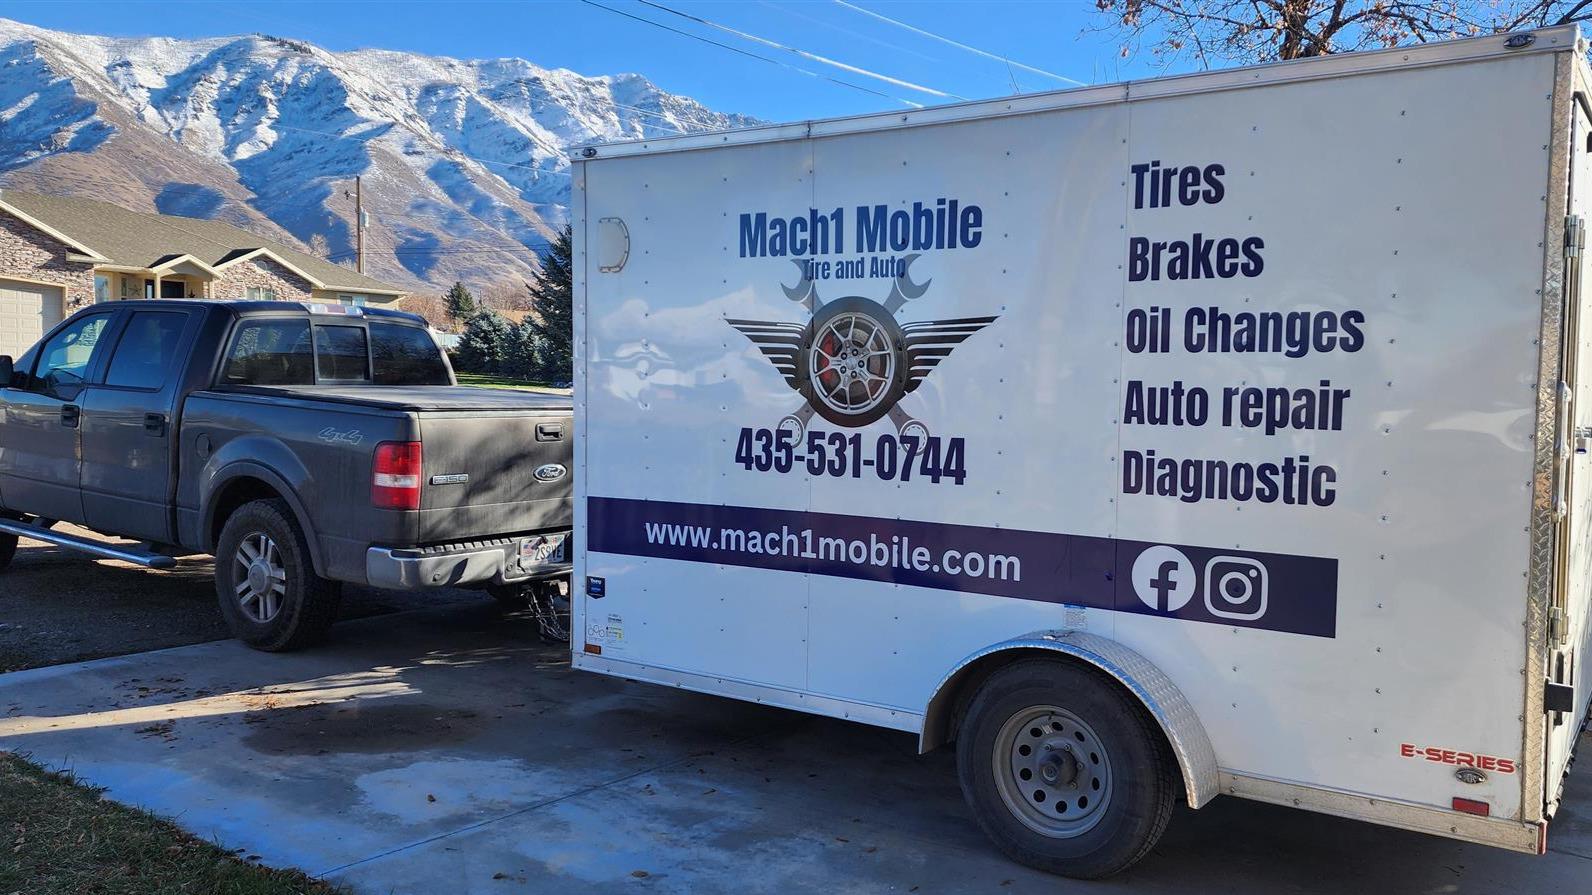 At Mach1 Mobile Tire and Auto LLC, our business owner provides thorough diagnostic services to pinpo Mach1 Mobile Tire and Auto Santaquin (435)531-0744